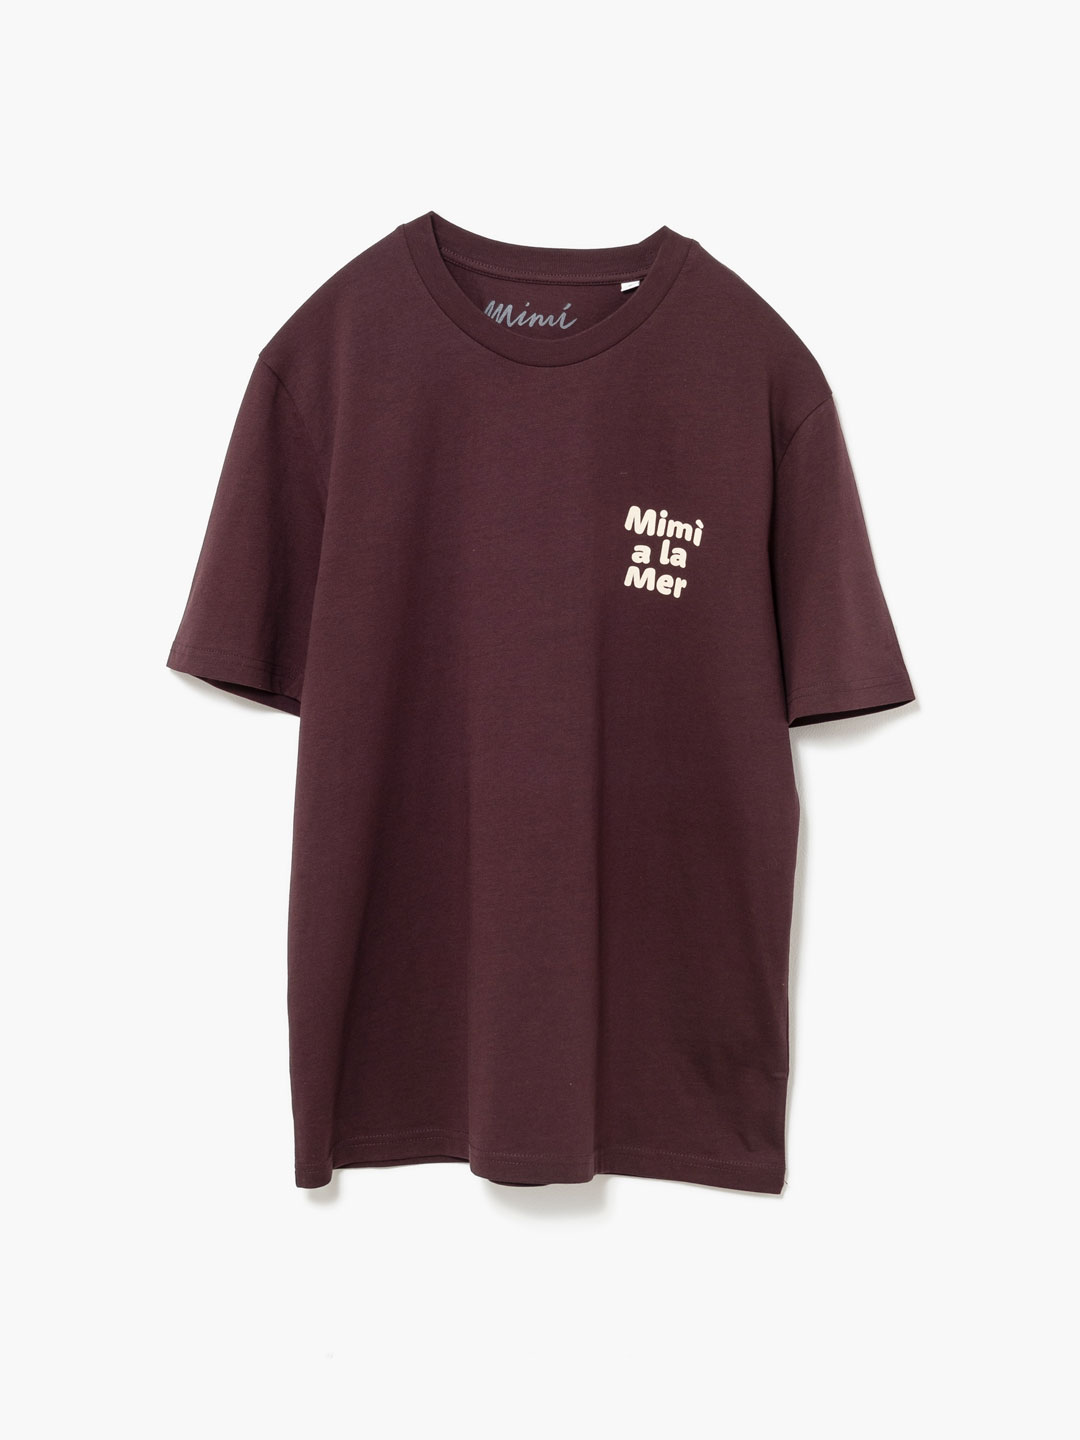 Lavorare T-Shirts - Brown